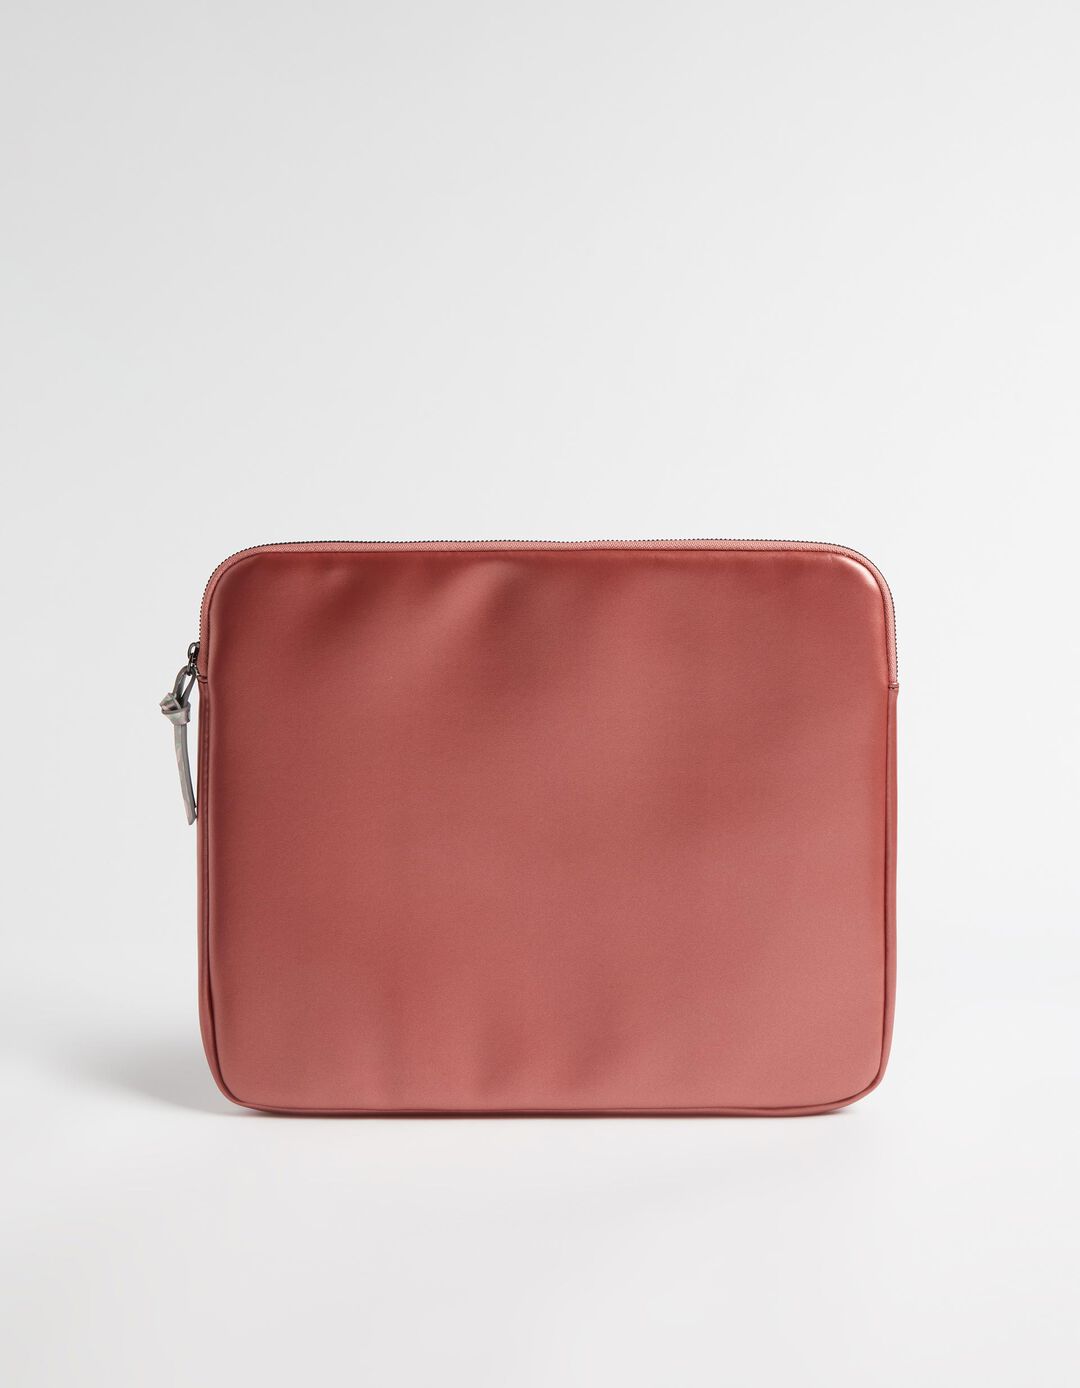 'Valentine's Day' Laptop Cover, Women, Pink